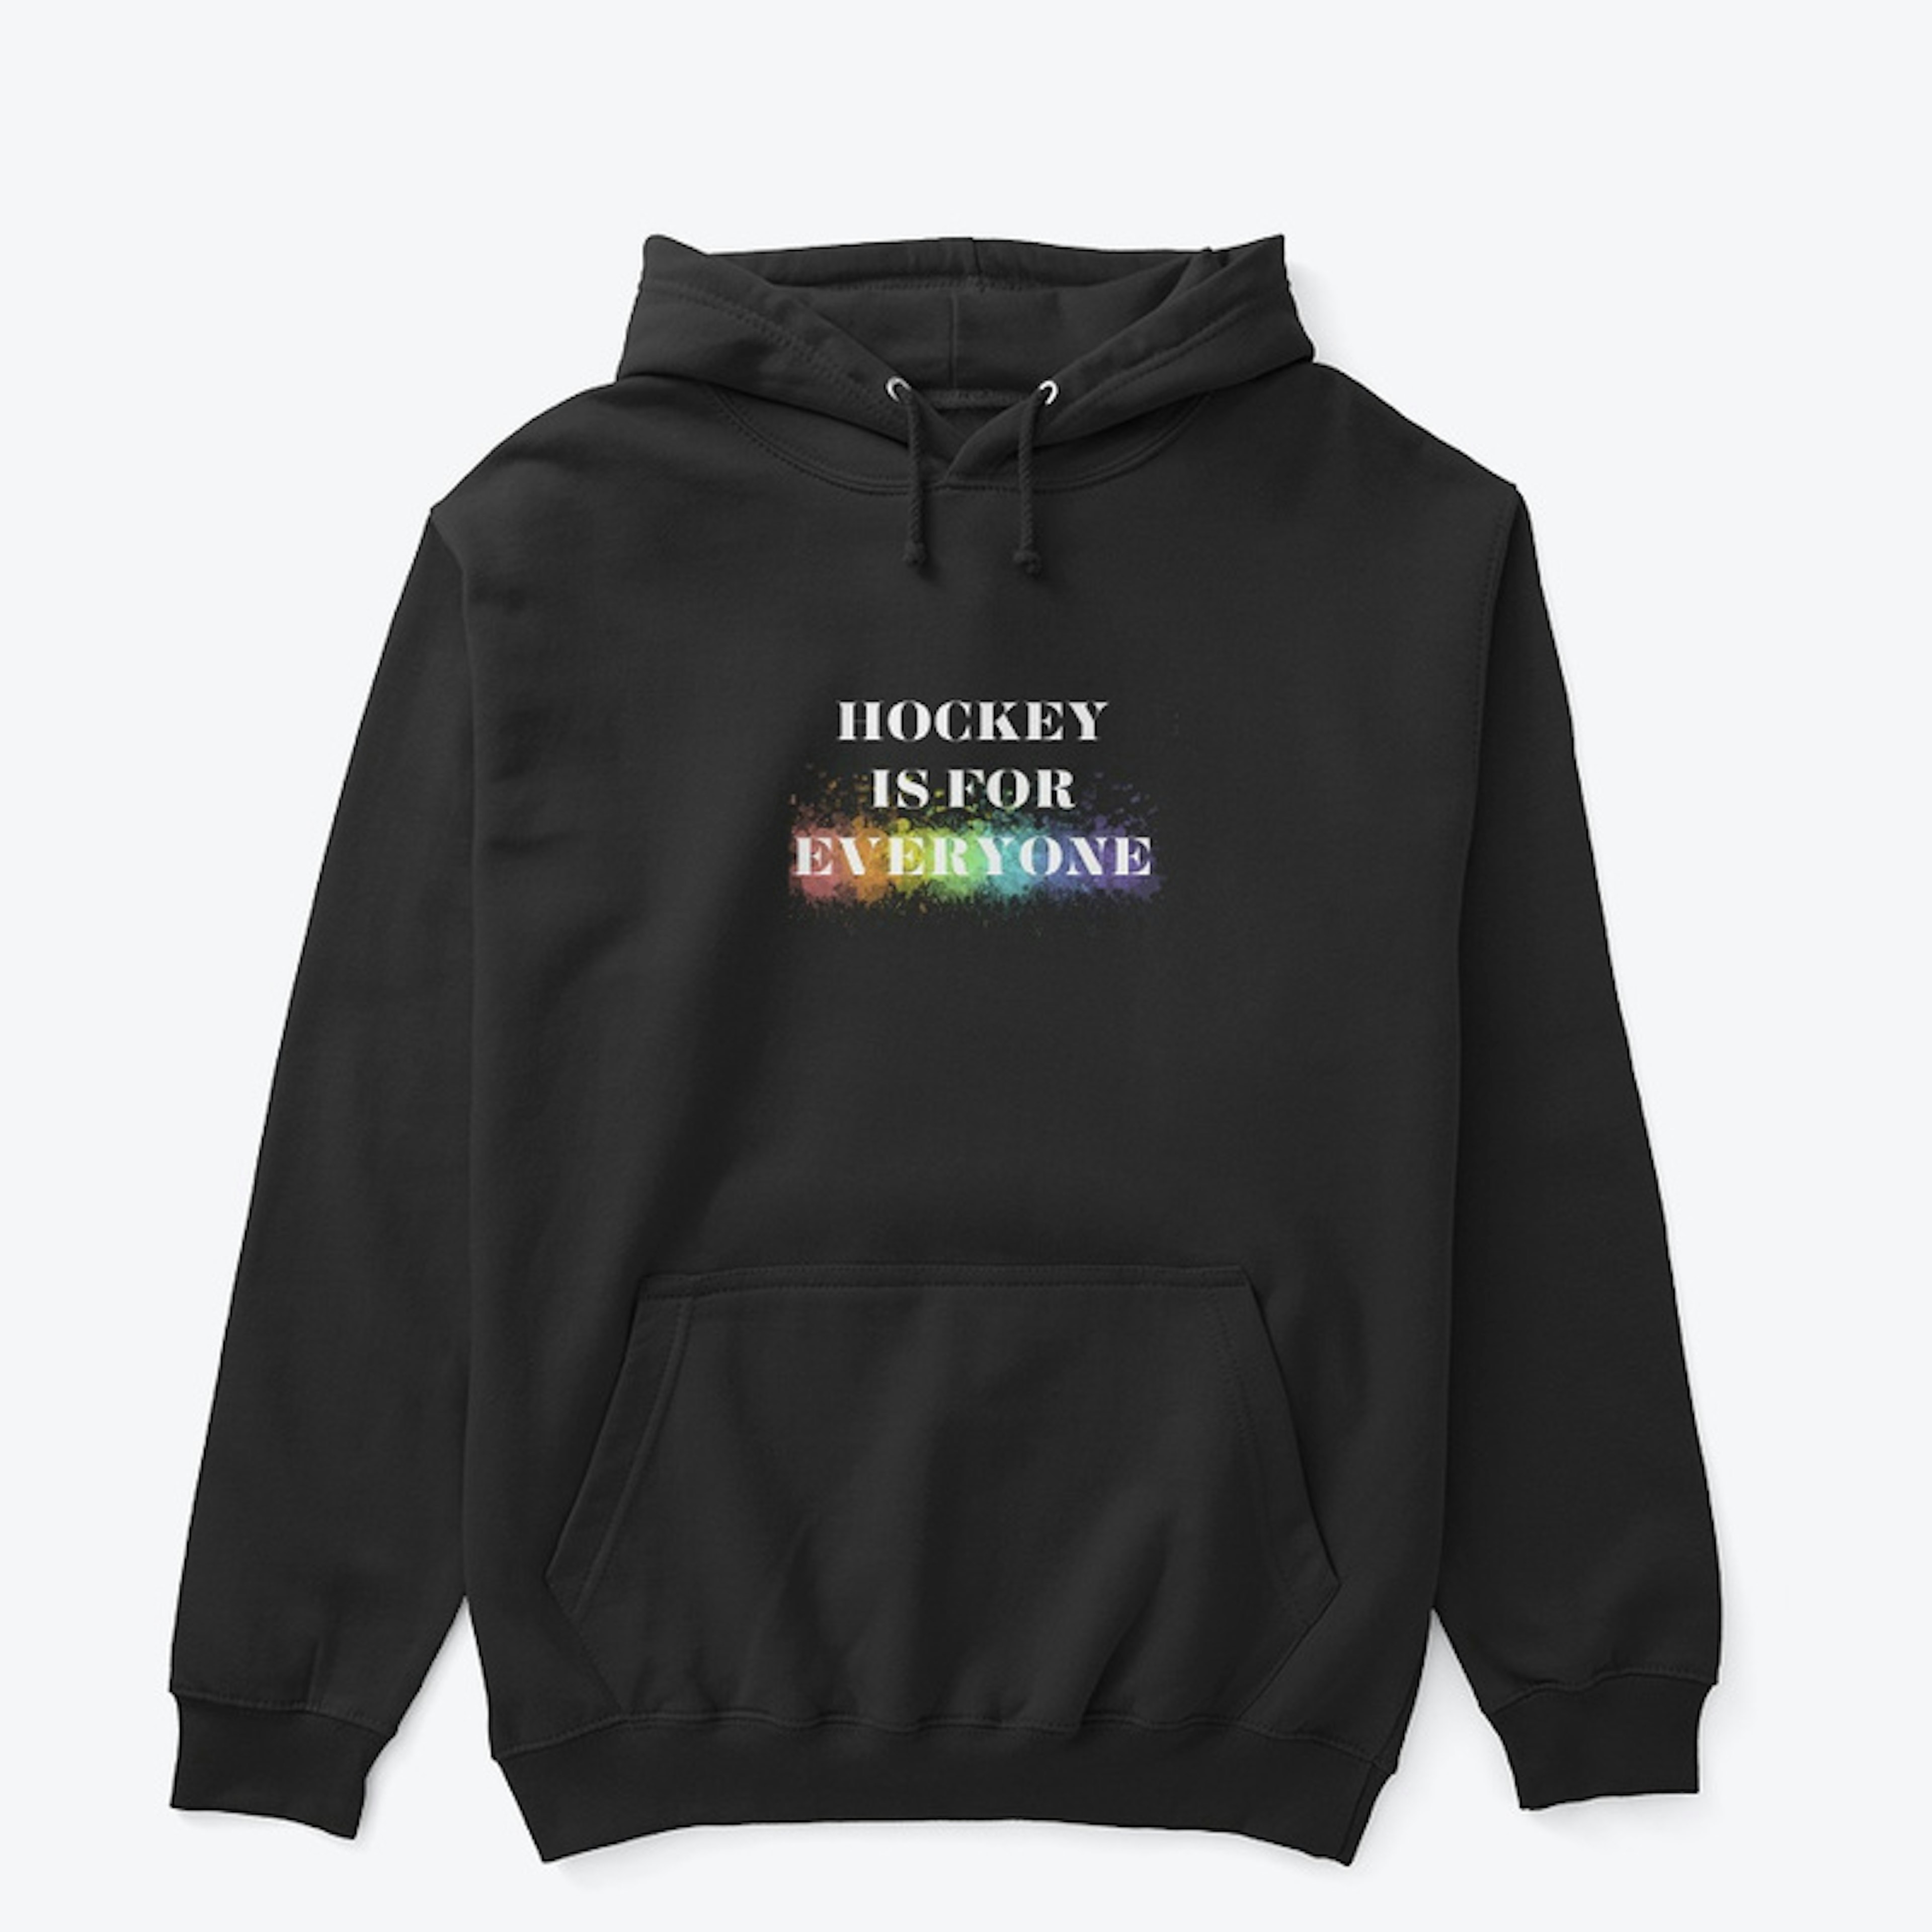 Hockey is for Everyone